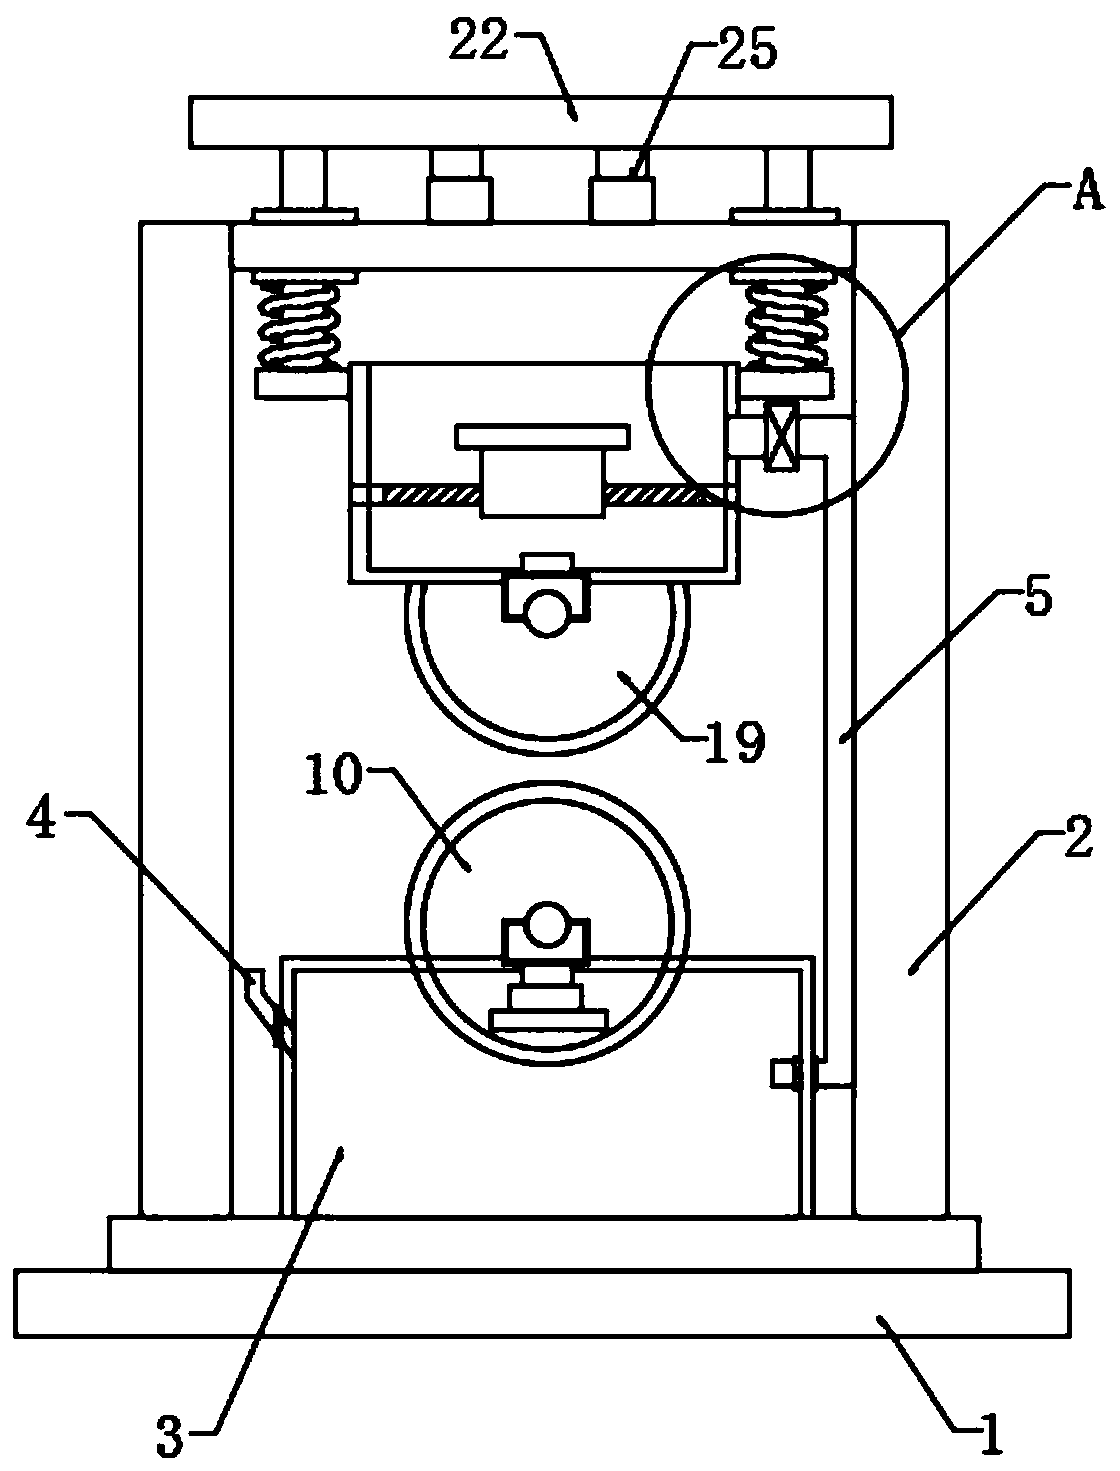 Gcluing device for textiles